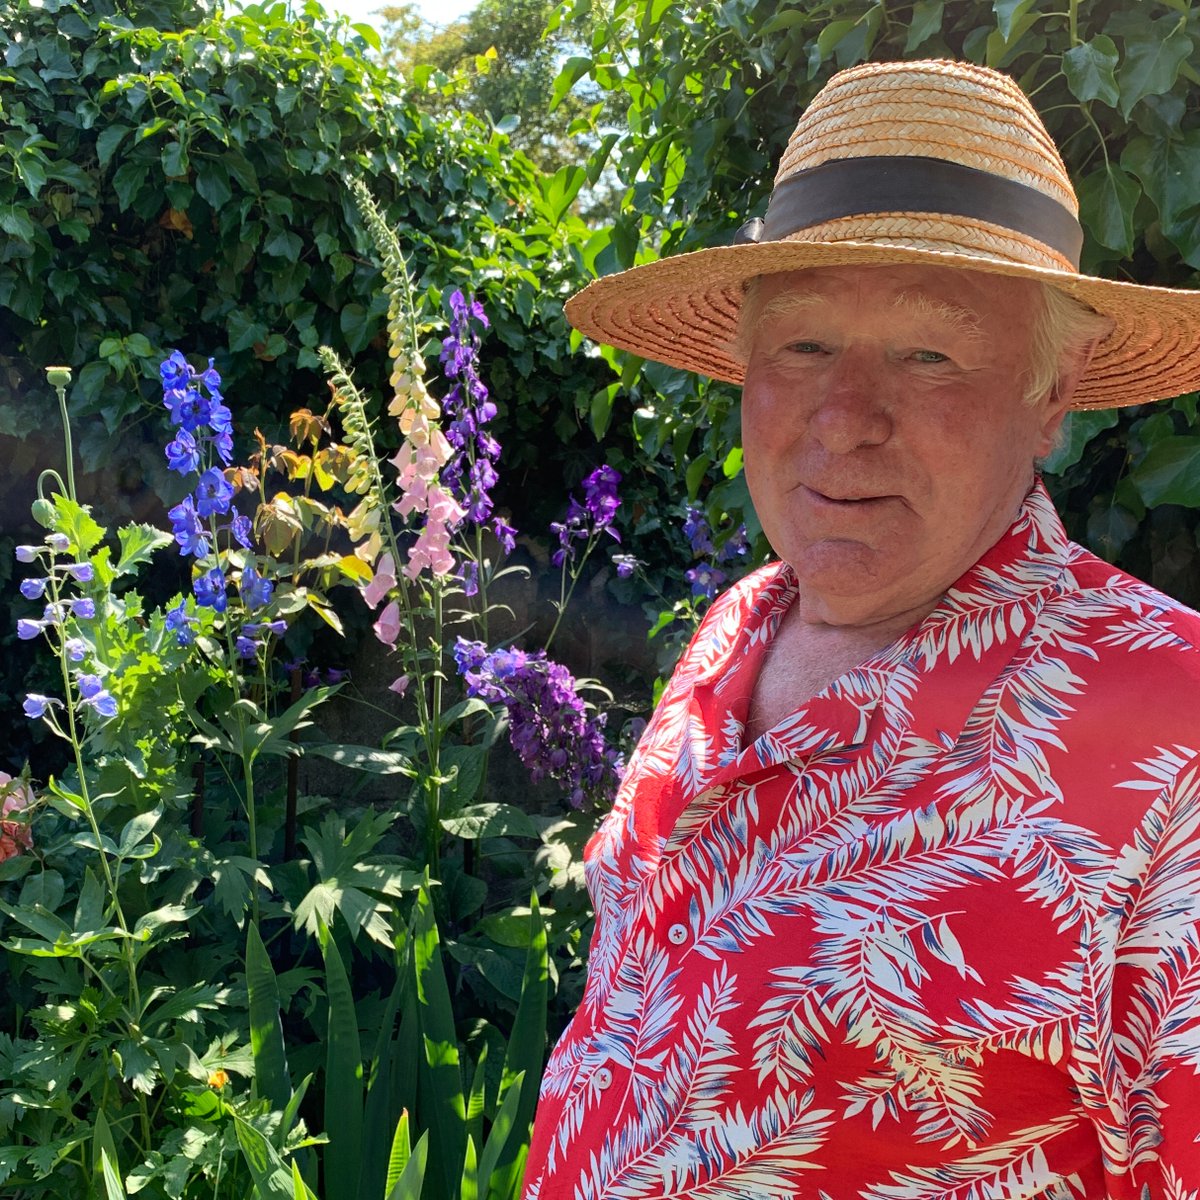 We hope you enjoyed meeting Jim McGill in his garden last week. He certainly made us smile. Episode 6 is available on @BBCiPlayer if you fancy a watch. A little something to brighten up your day 😎 🌹 🌼 #GardenersWorld #Gardening #InMyGarden #SummerVibes